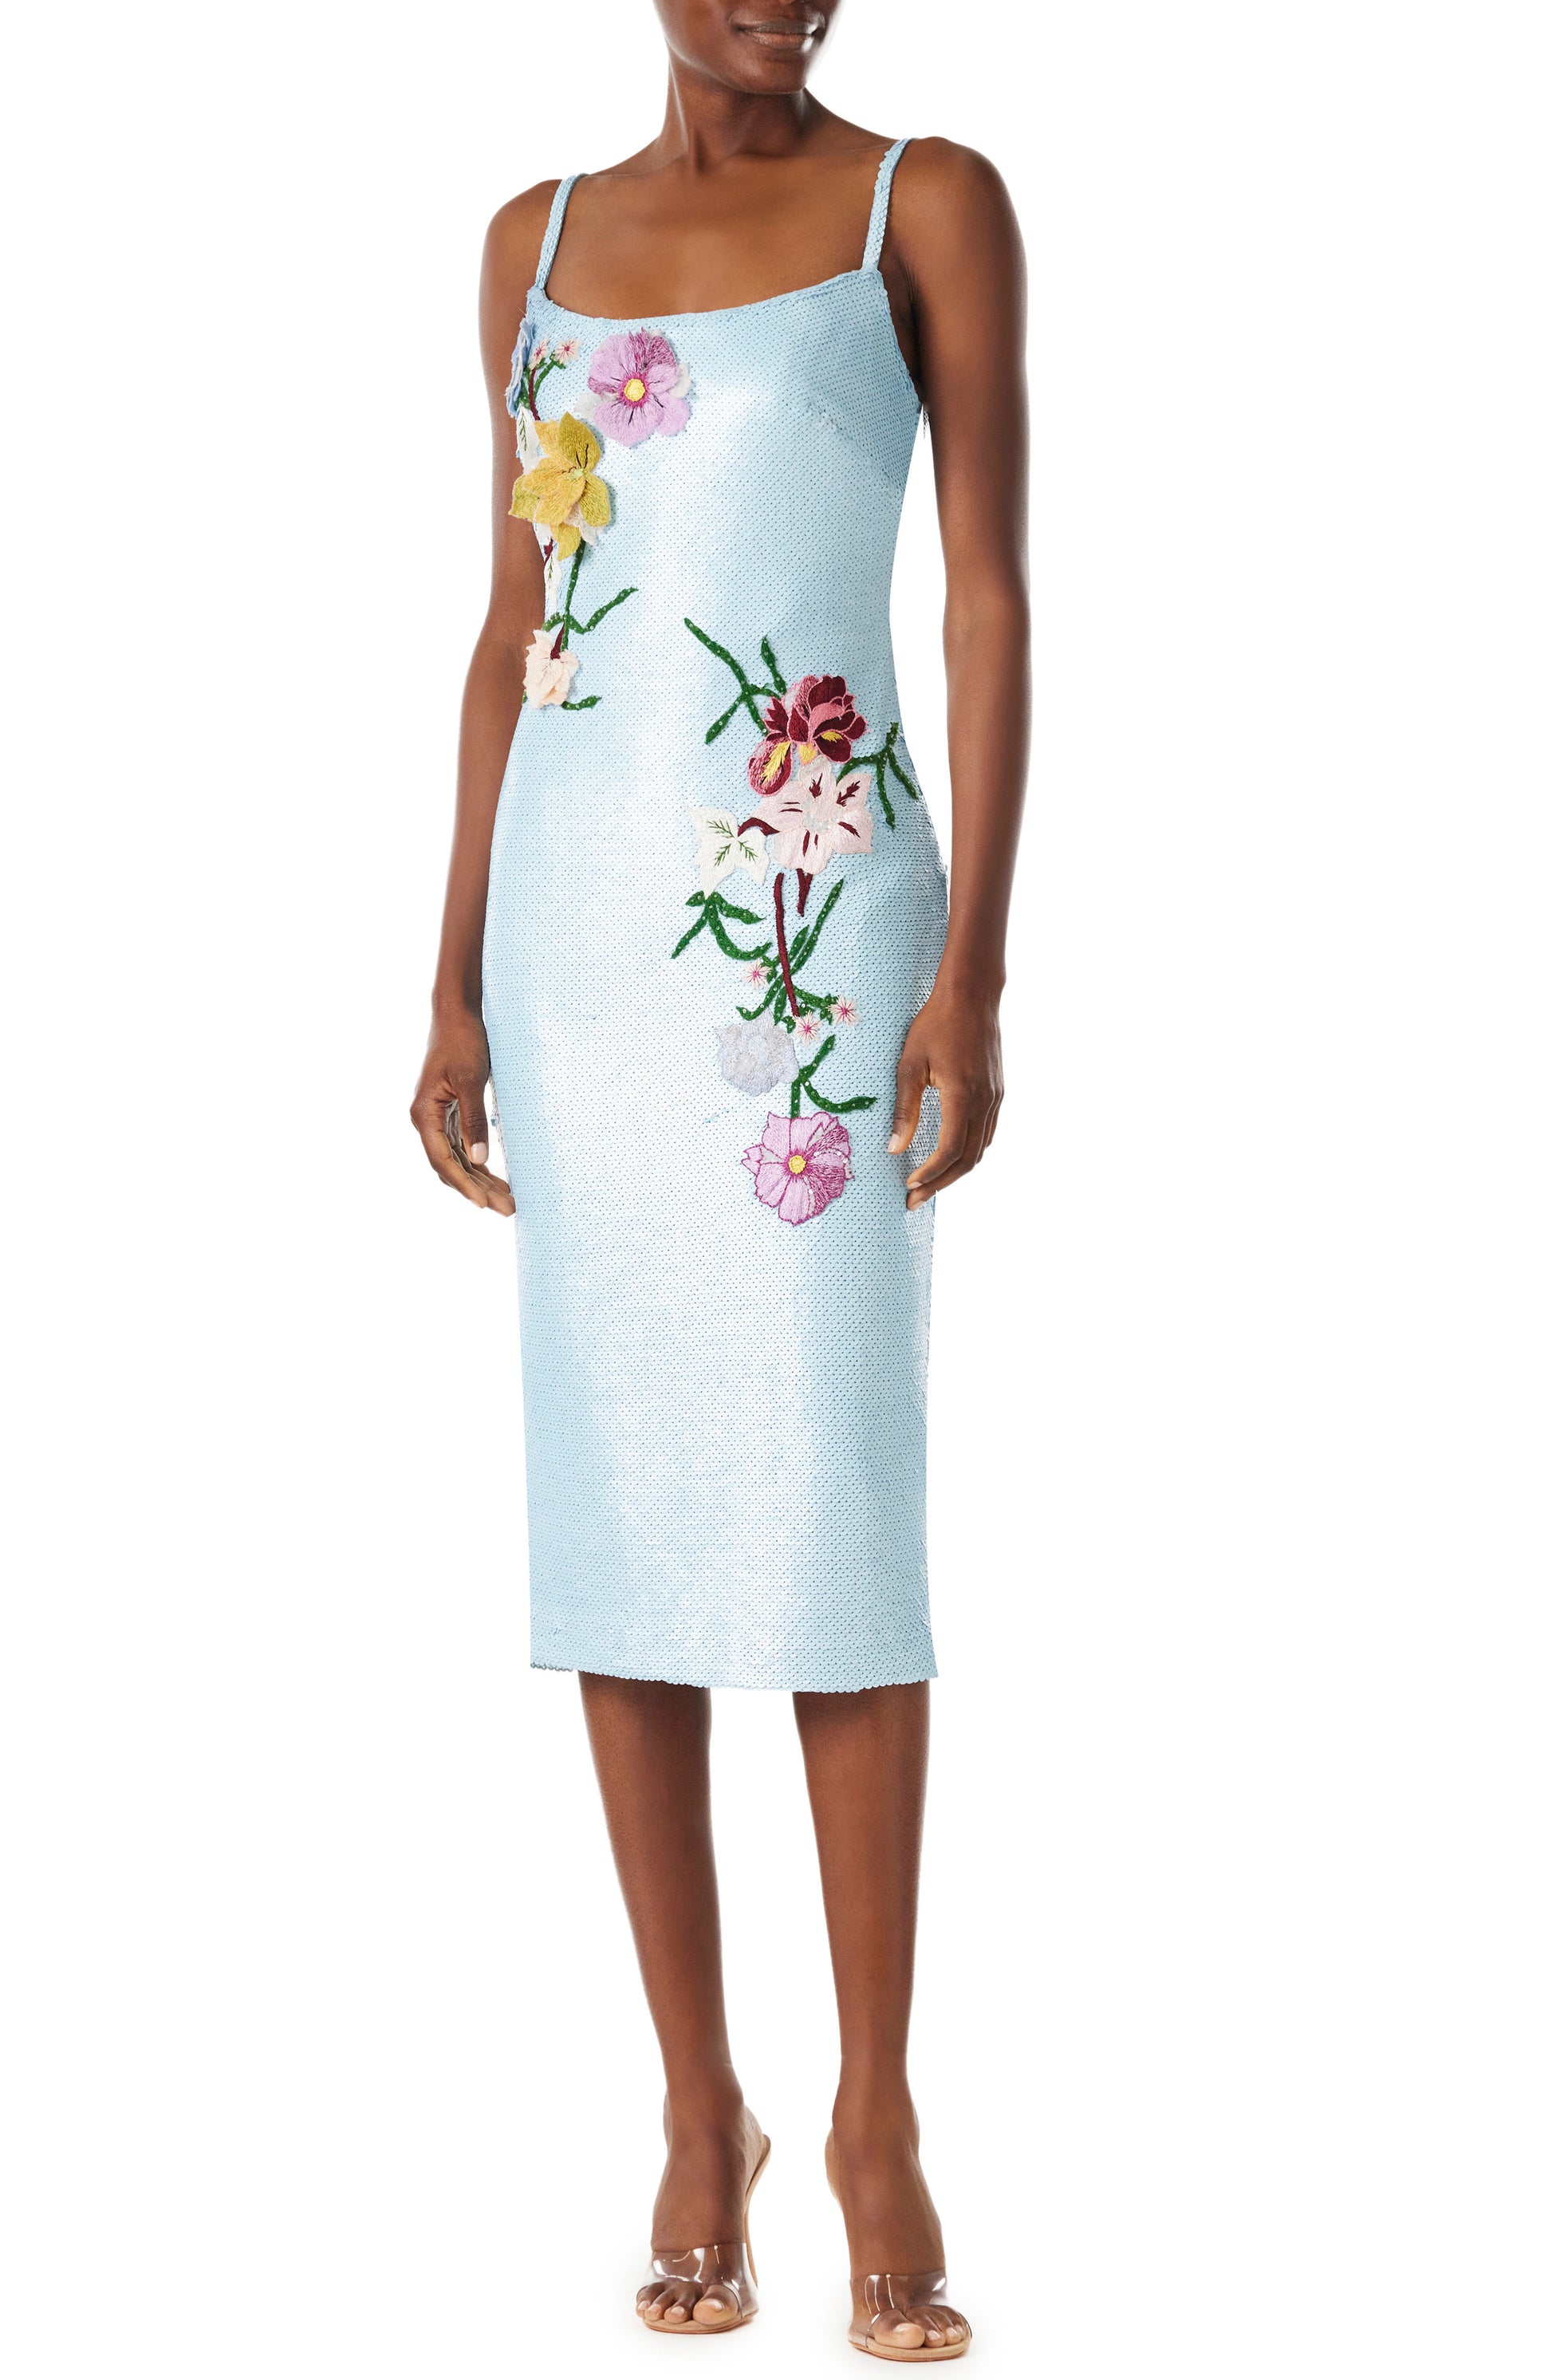 Monique Lhuillier midi-length sky blue sequin dress with spaghetti straps and floral embroidery.